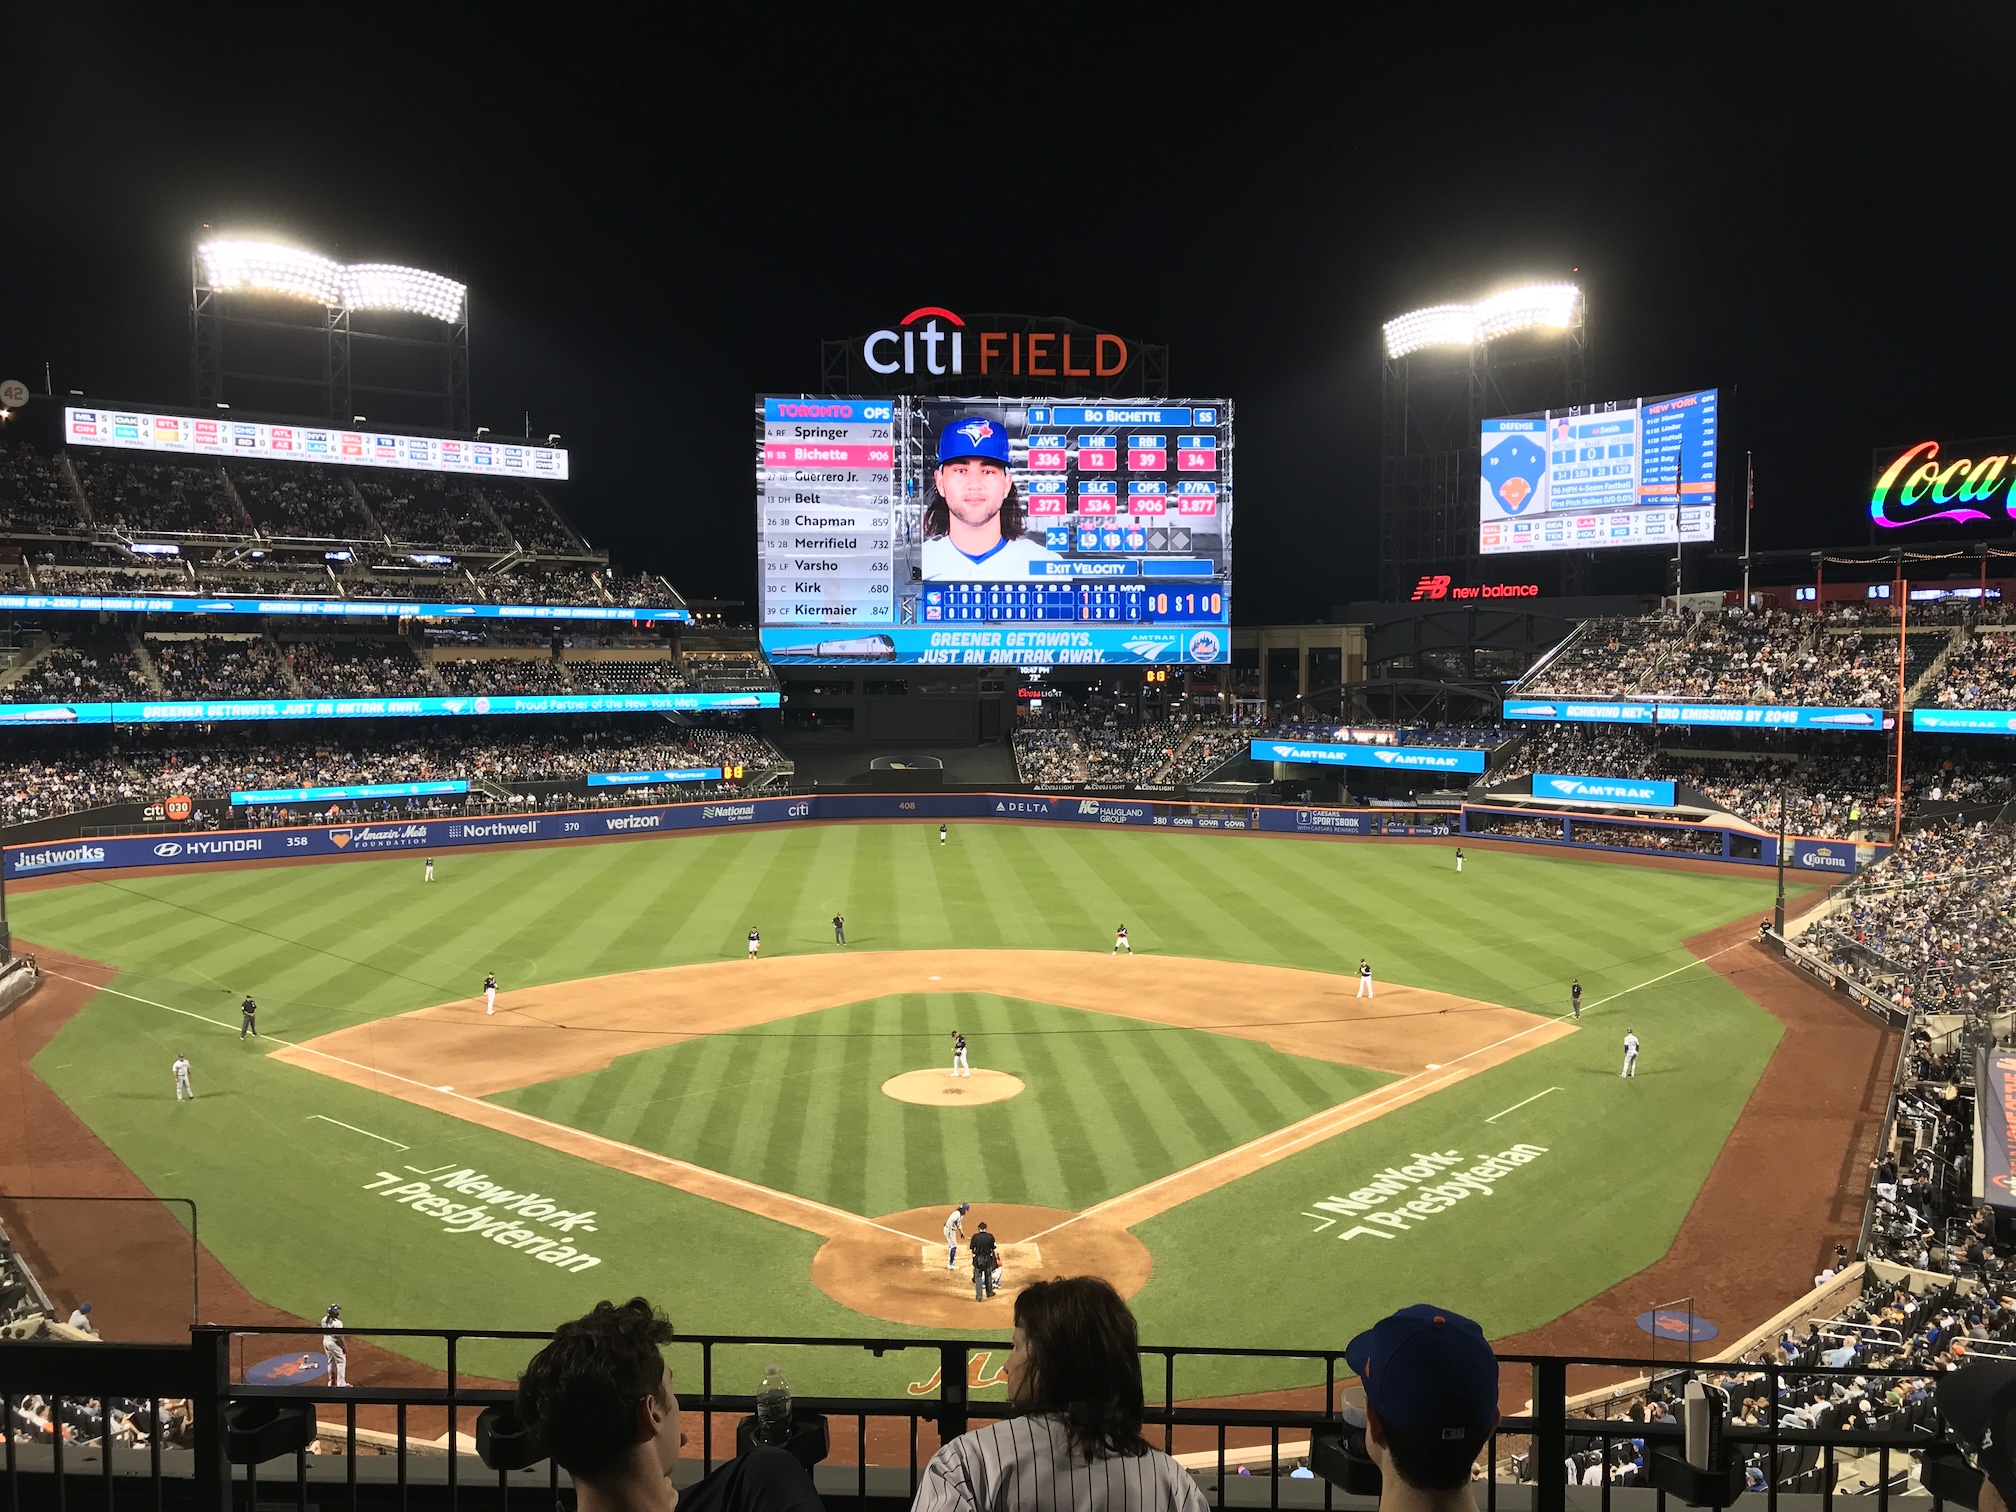 section 319, row 4 seat view  - citi field